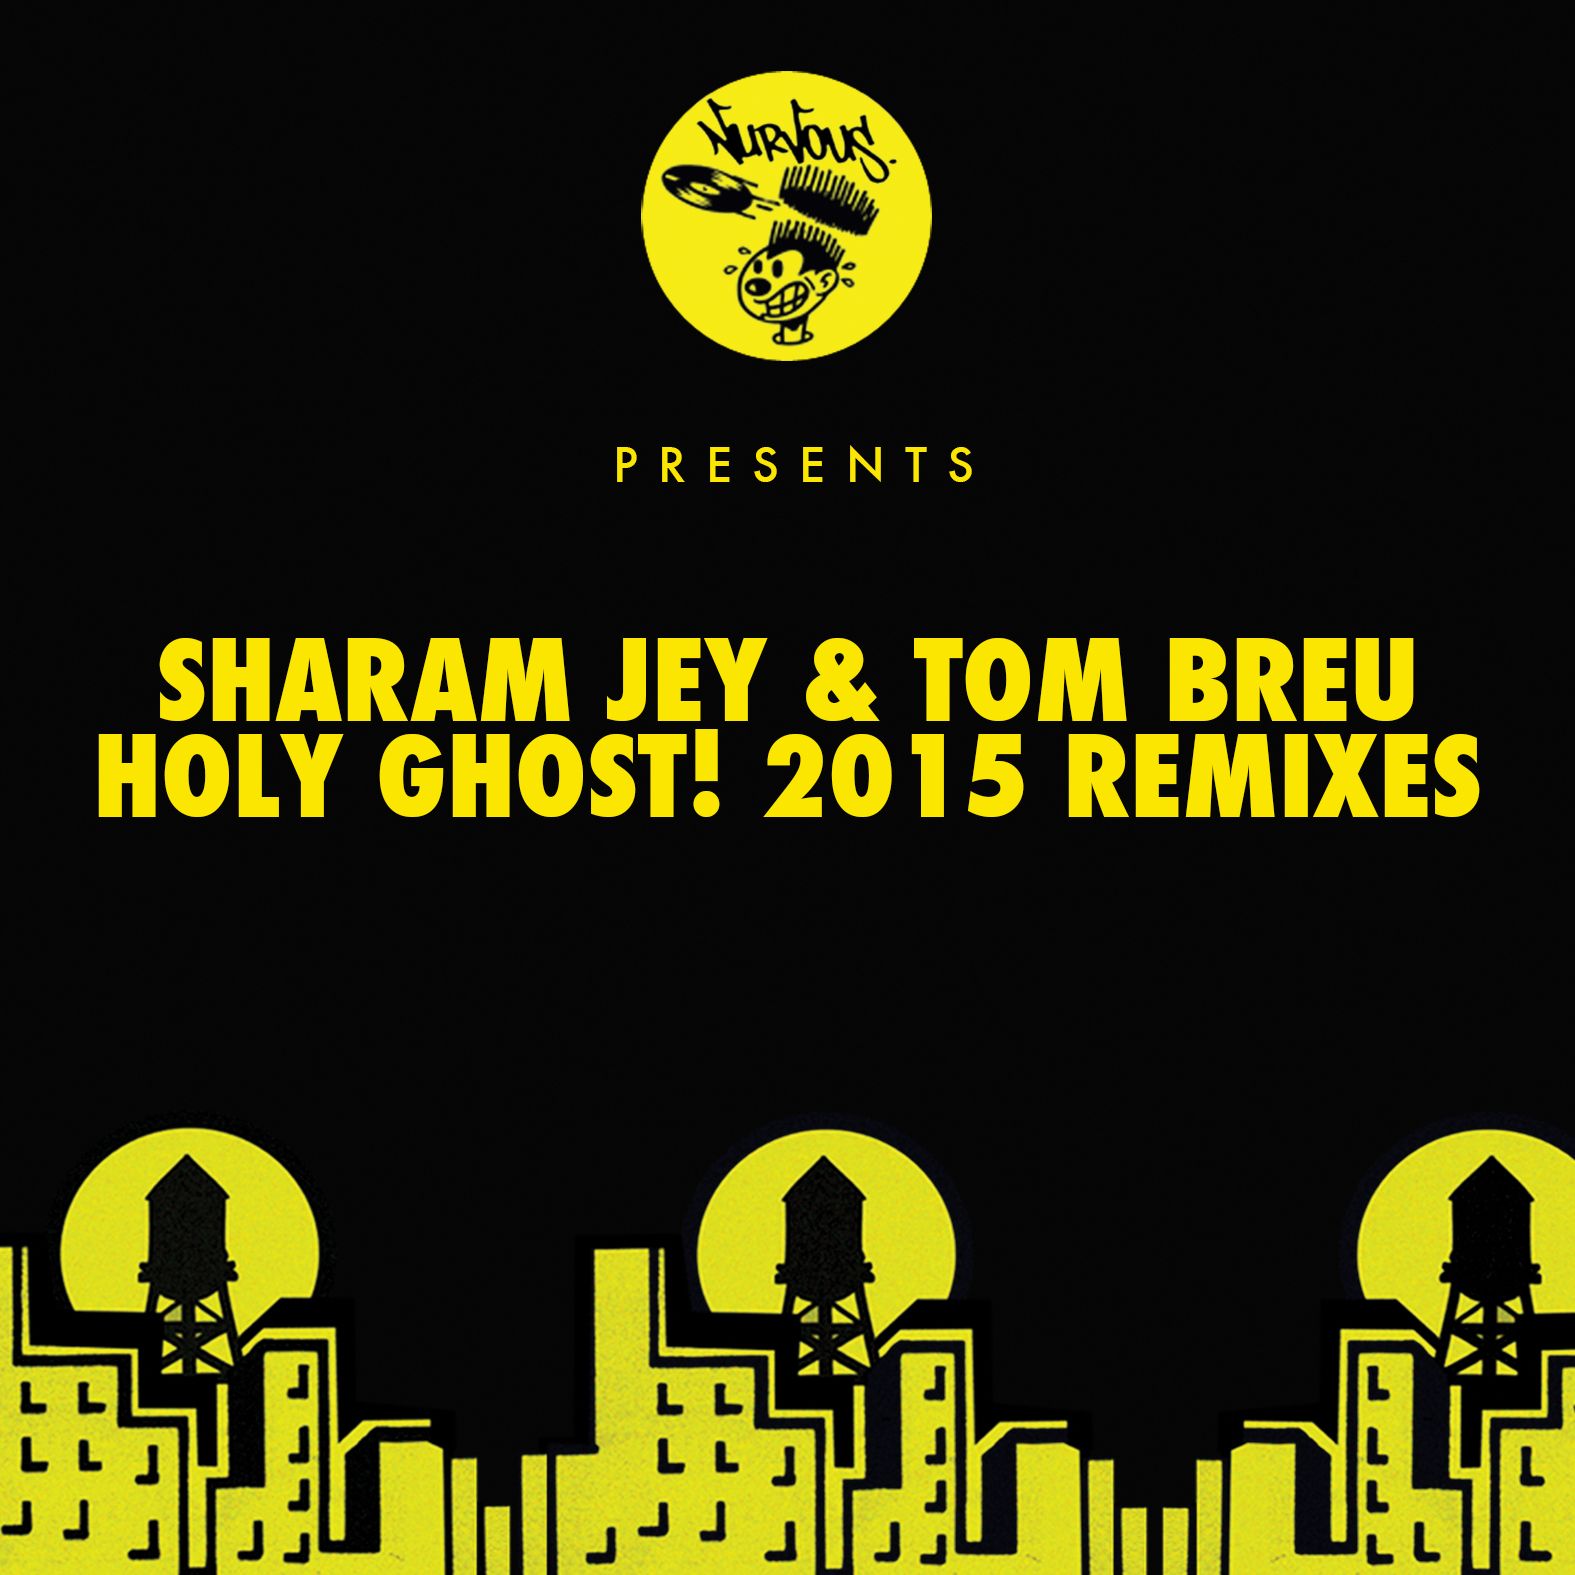 Holy Ghost! (Climbers Remix)